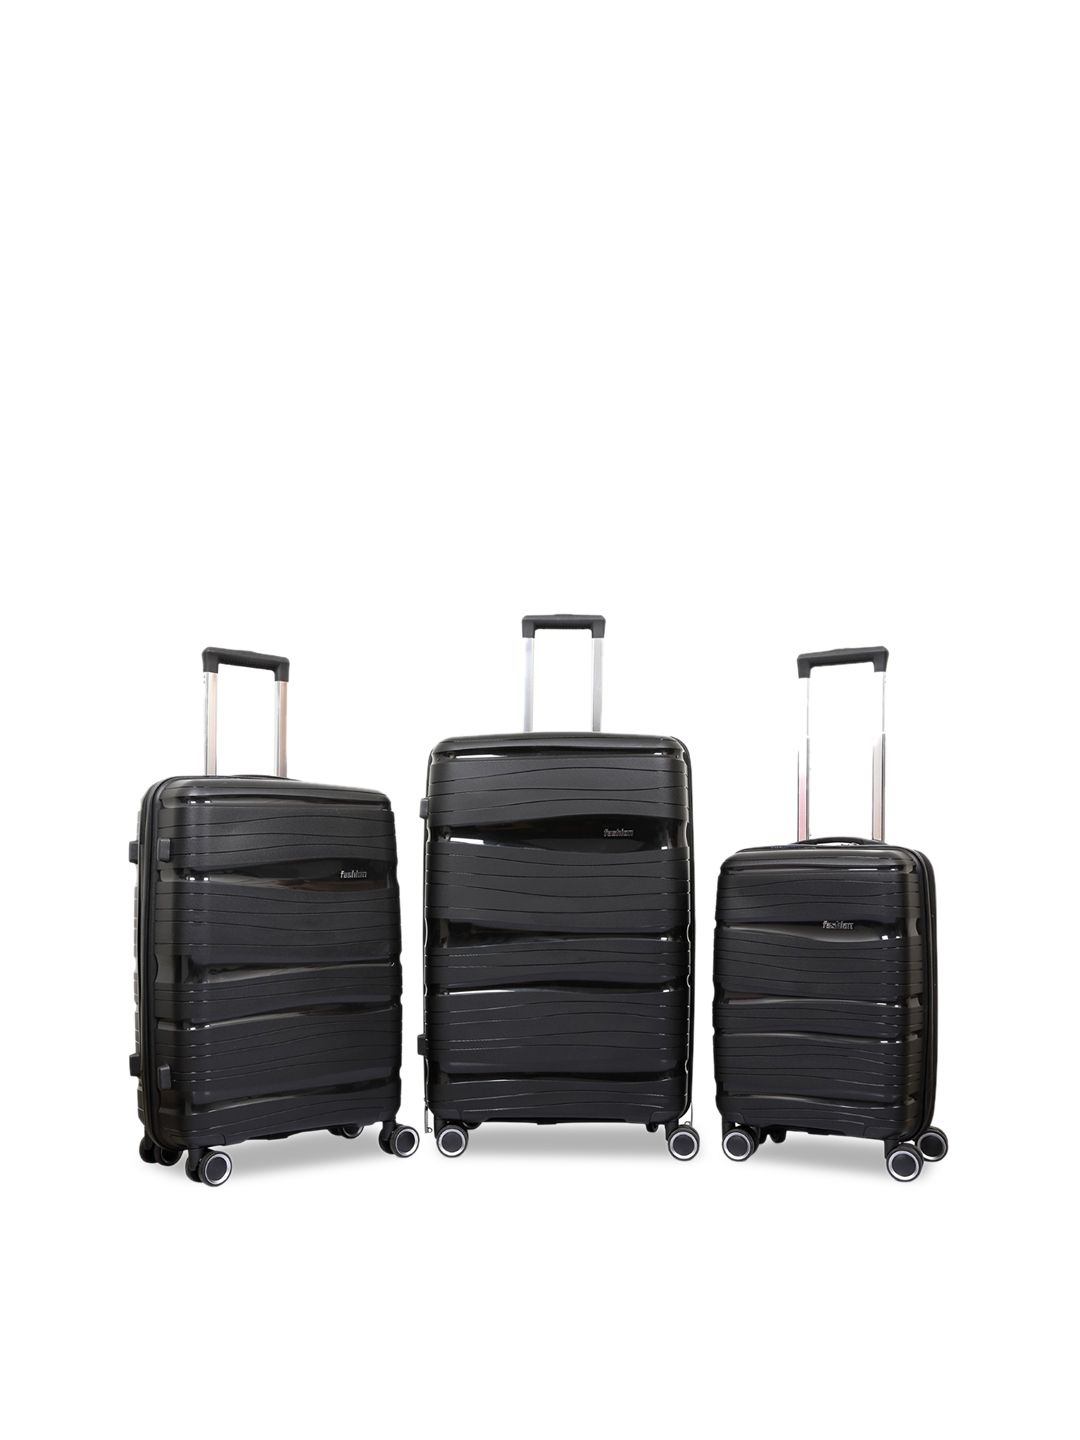 Polo Class Set of 3 Black Trolley Bags Price in India